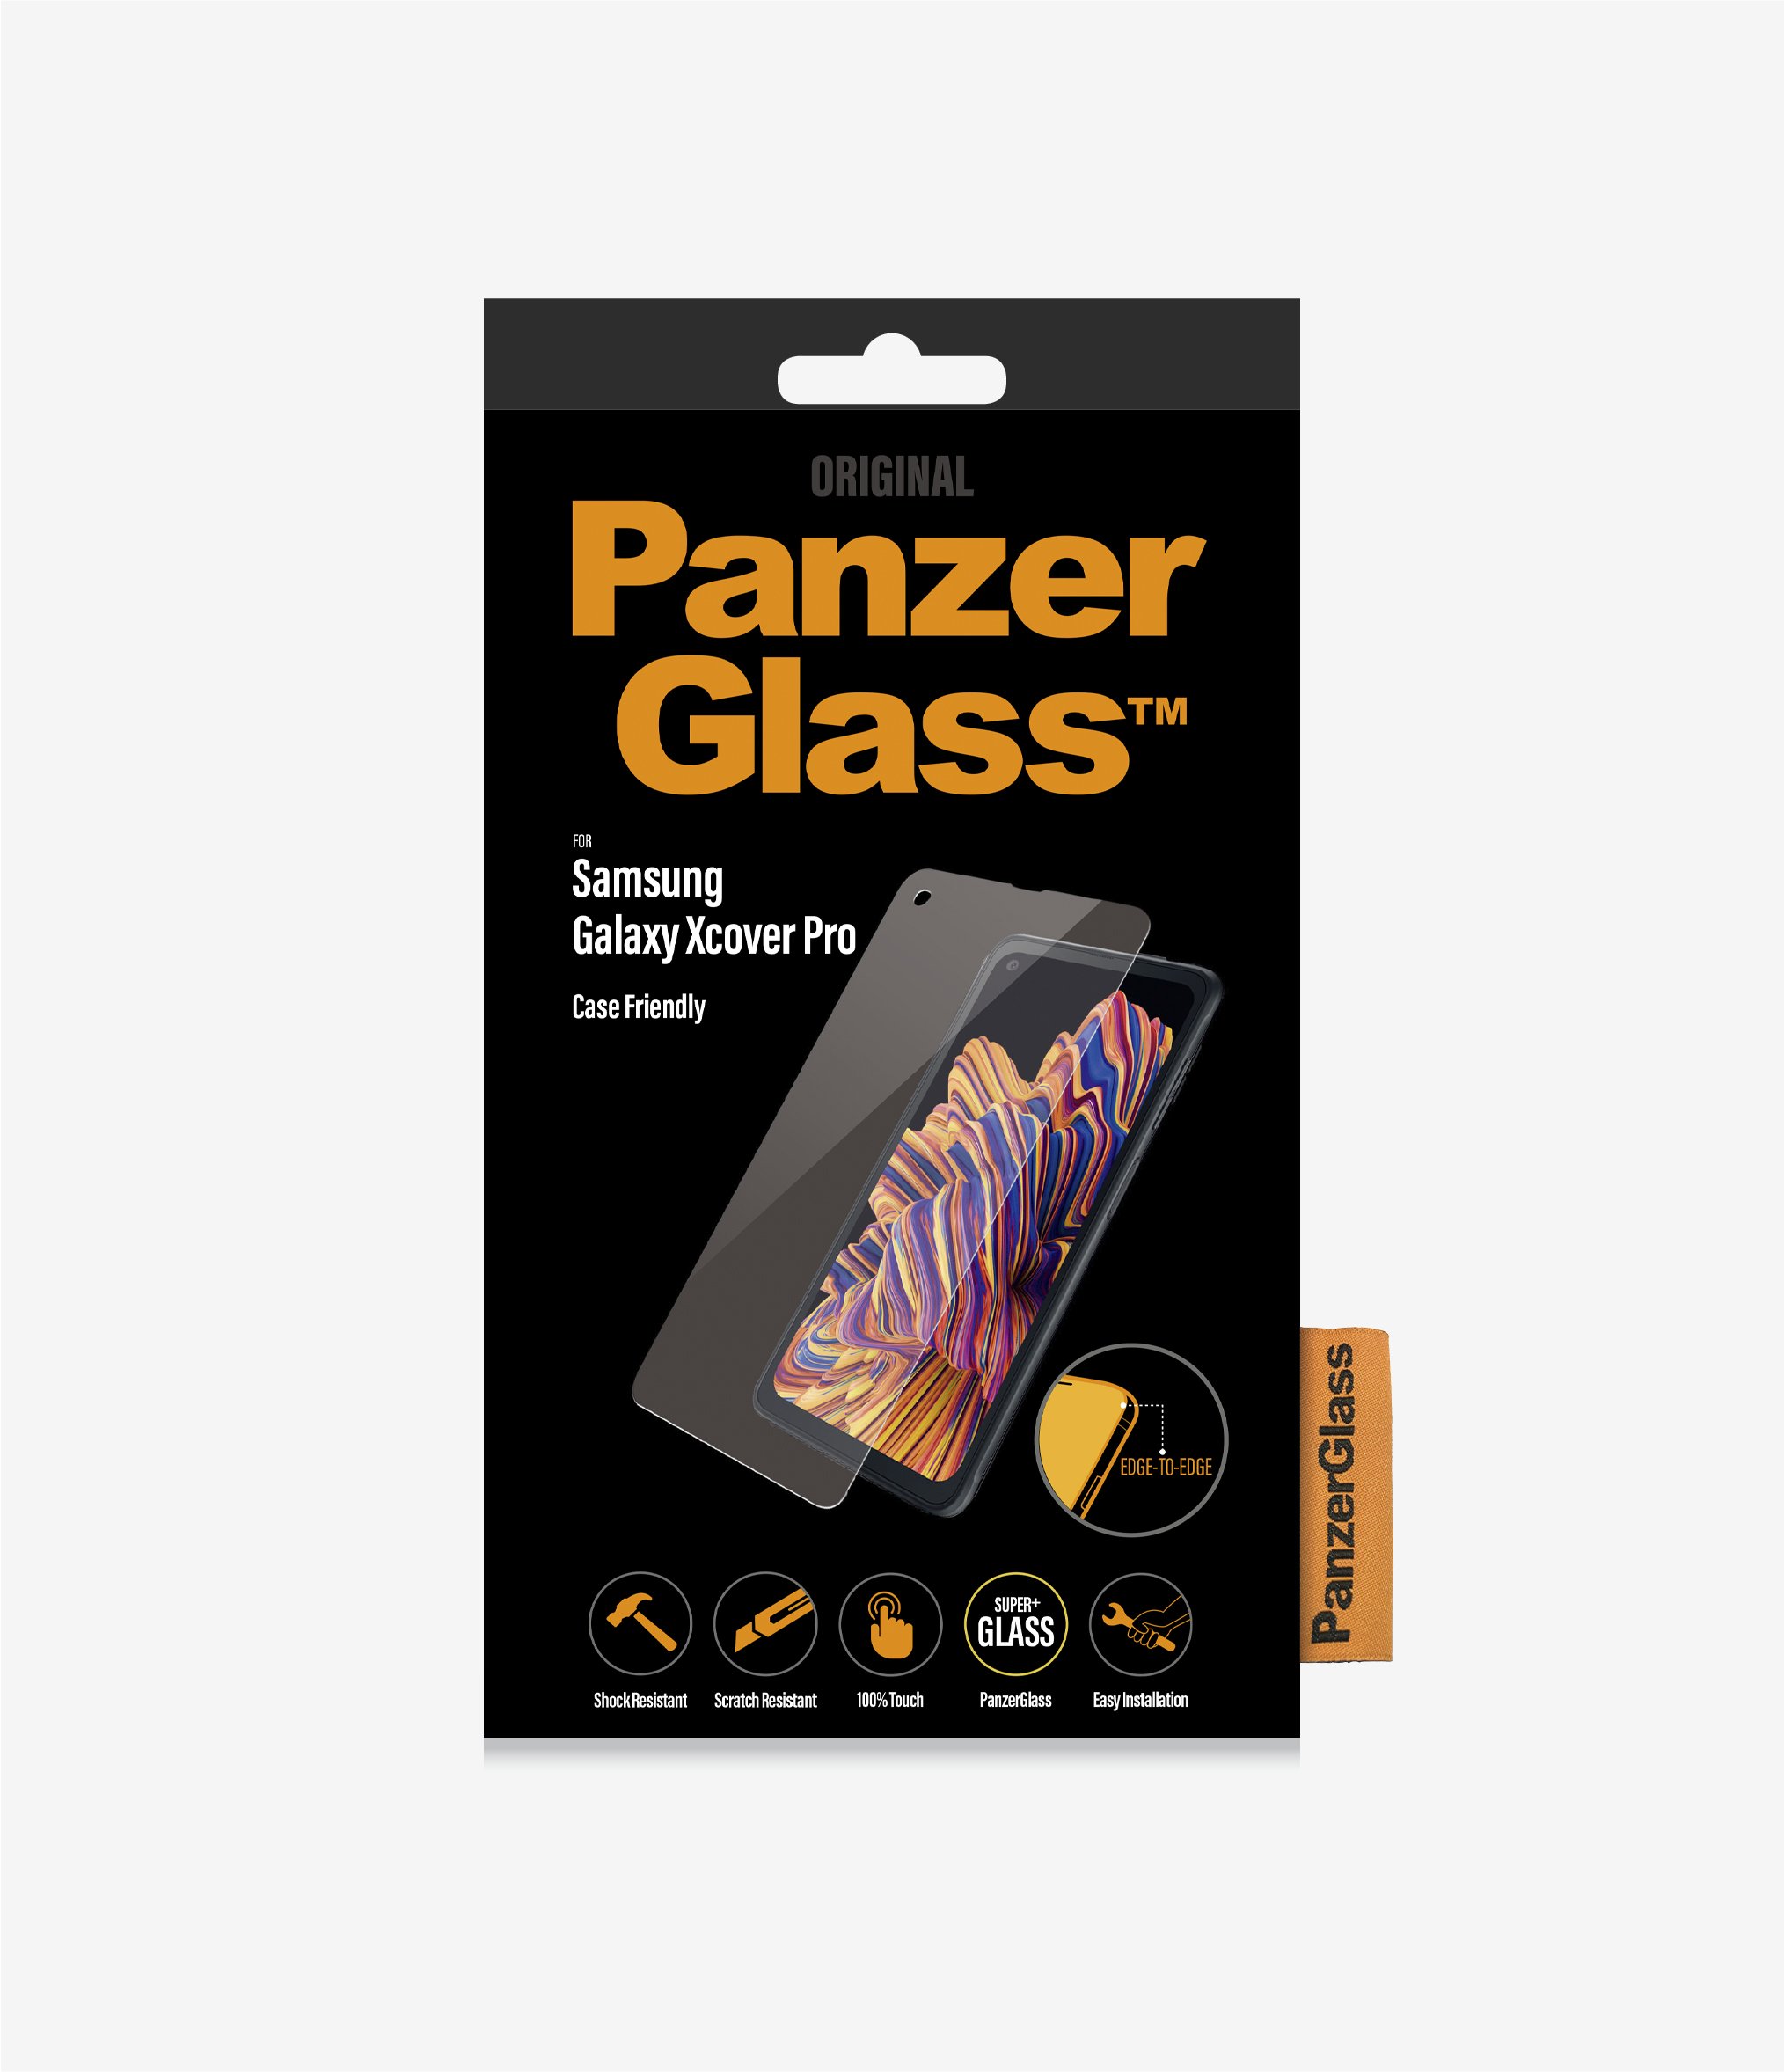 PanzerGlass™ Samsung Galaxy Xcover Pro - Clear Glass (7227) - Screen Protector - Full frame coverage, Rounded edges, Crystal clear, 100% touch